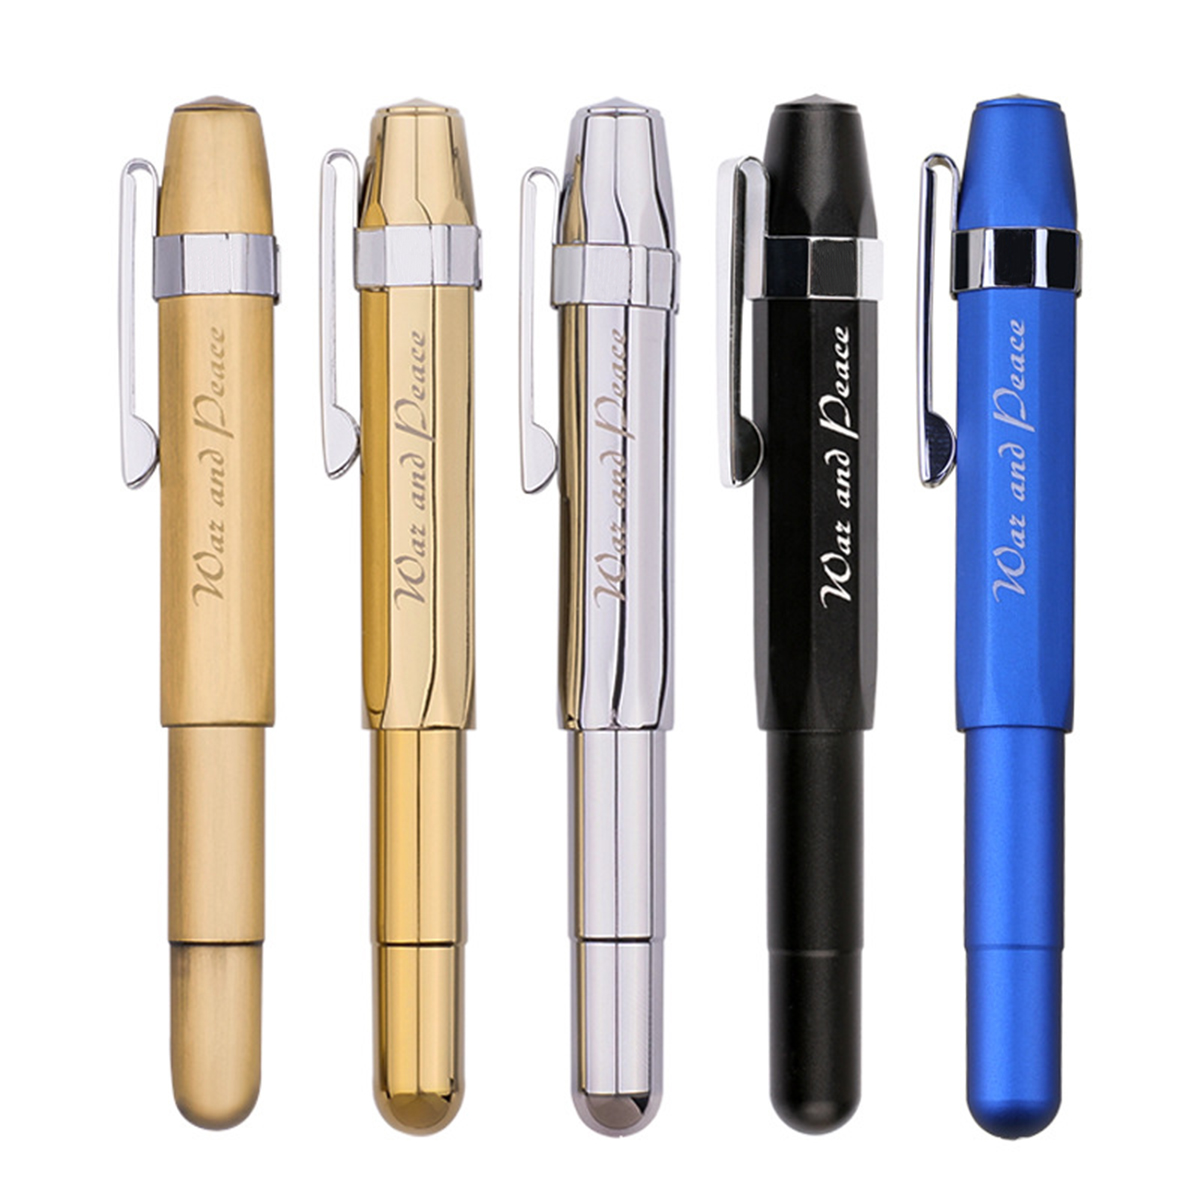 Metal-Fountain-Pen-Short-Smooth-Calligraphy-Writing-Pen-Ink-Gel-Pen-with-Iron-Case-Gift-for-Students-1755553-1